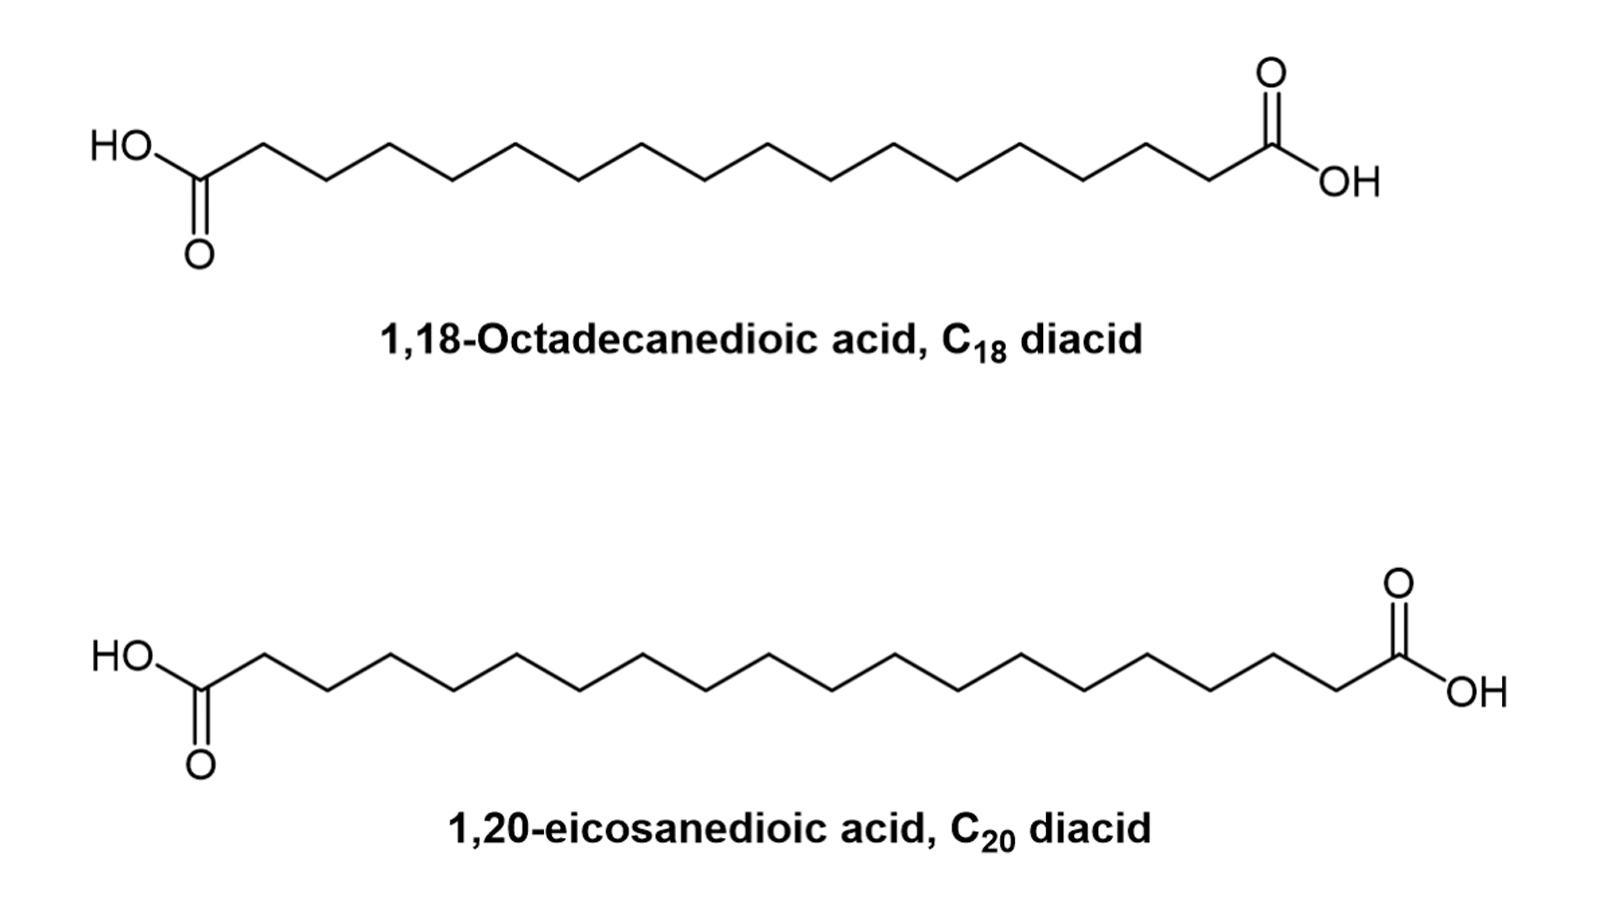 Figure 1. Chemical structures of C18 and C20 diacids